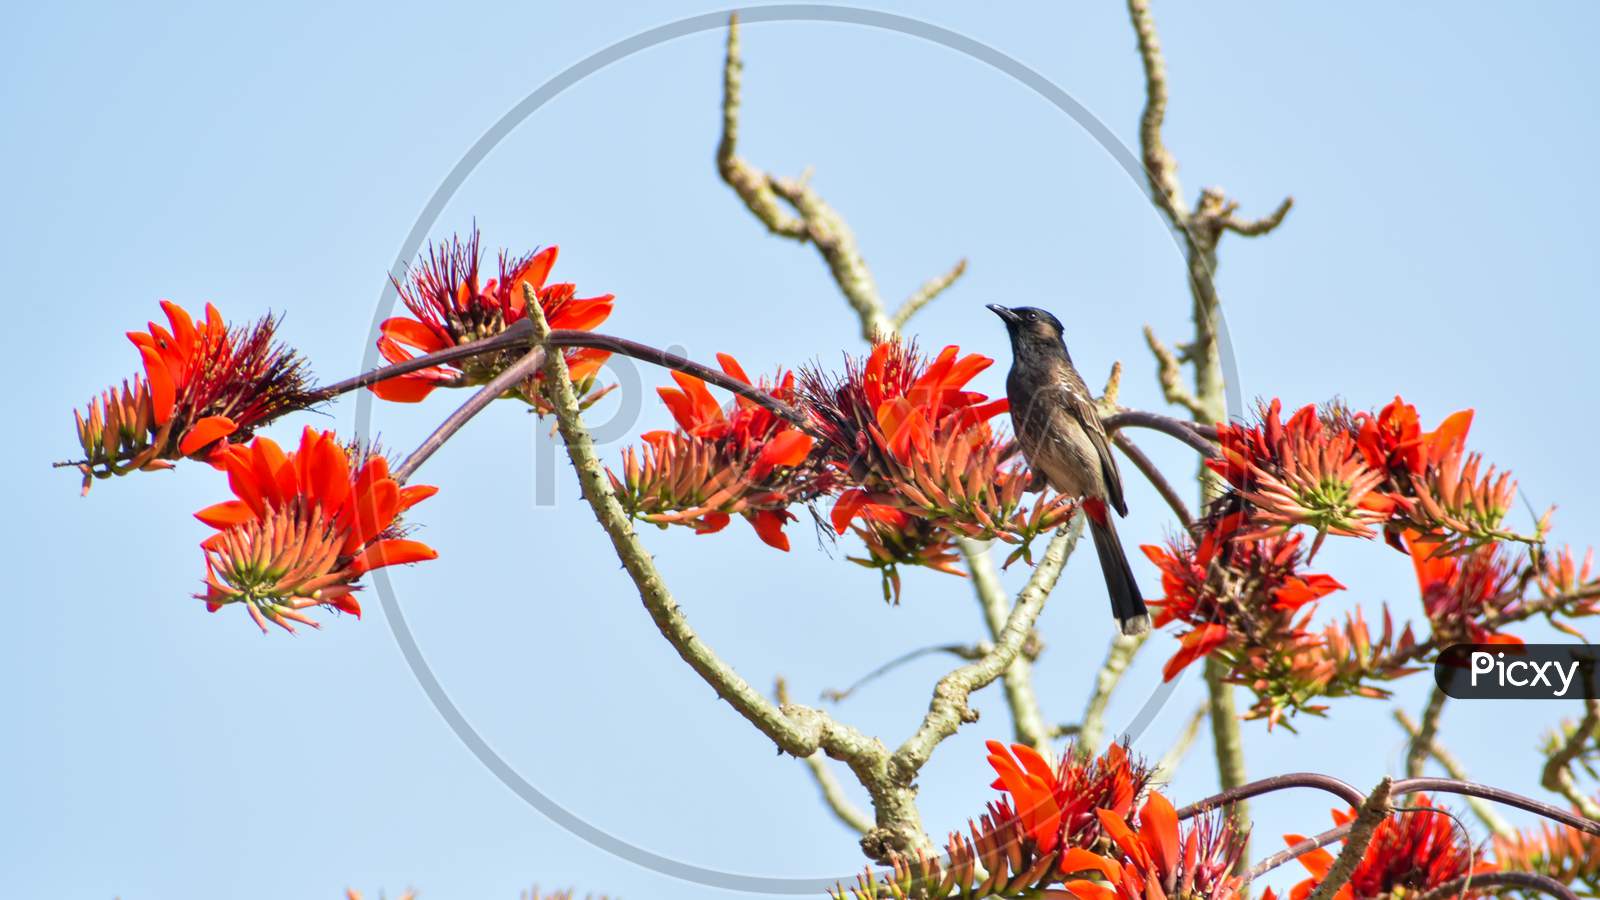 The Bulbuls Are A Family, Pycnonotidae, Of Medium-Sized Passerine Songbirds. Many Forest Species Are Known As Greenbuls, Brownbuls, Leafloves, Or Bristlebills.